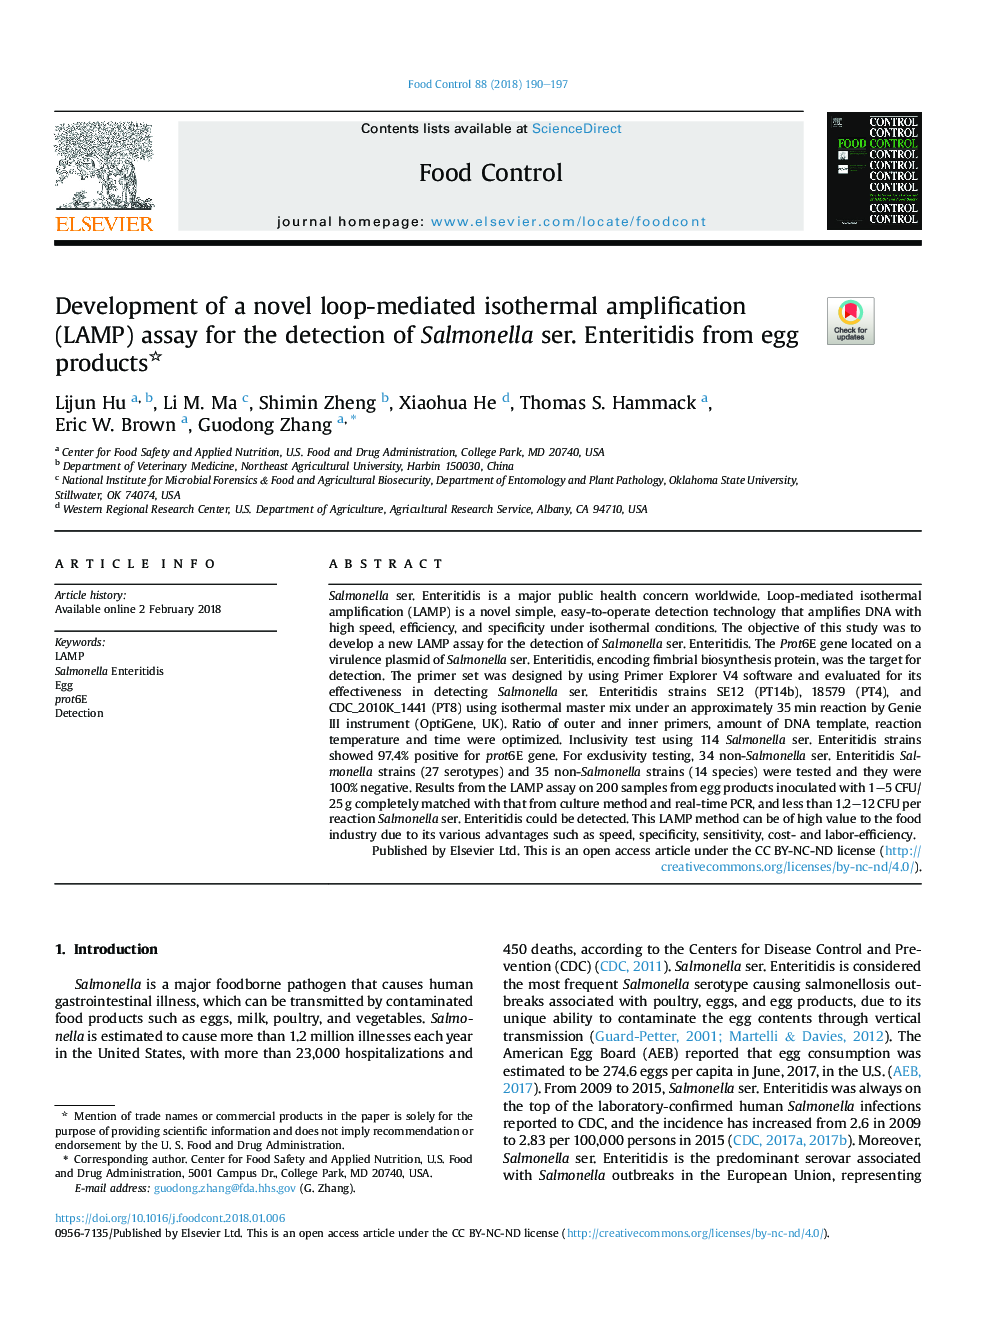 Development of a novel loop-mediated isothermal amplification (LAMP) assay for the detection of Salmonella ser. Enteritidis from egg products